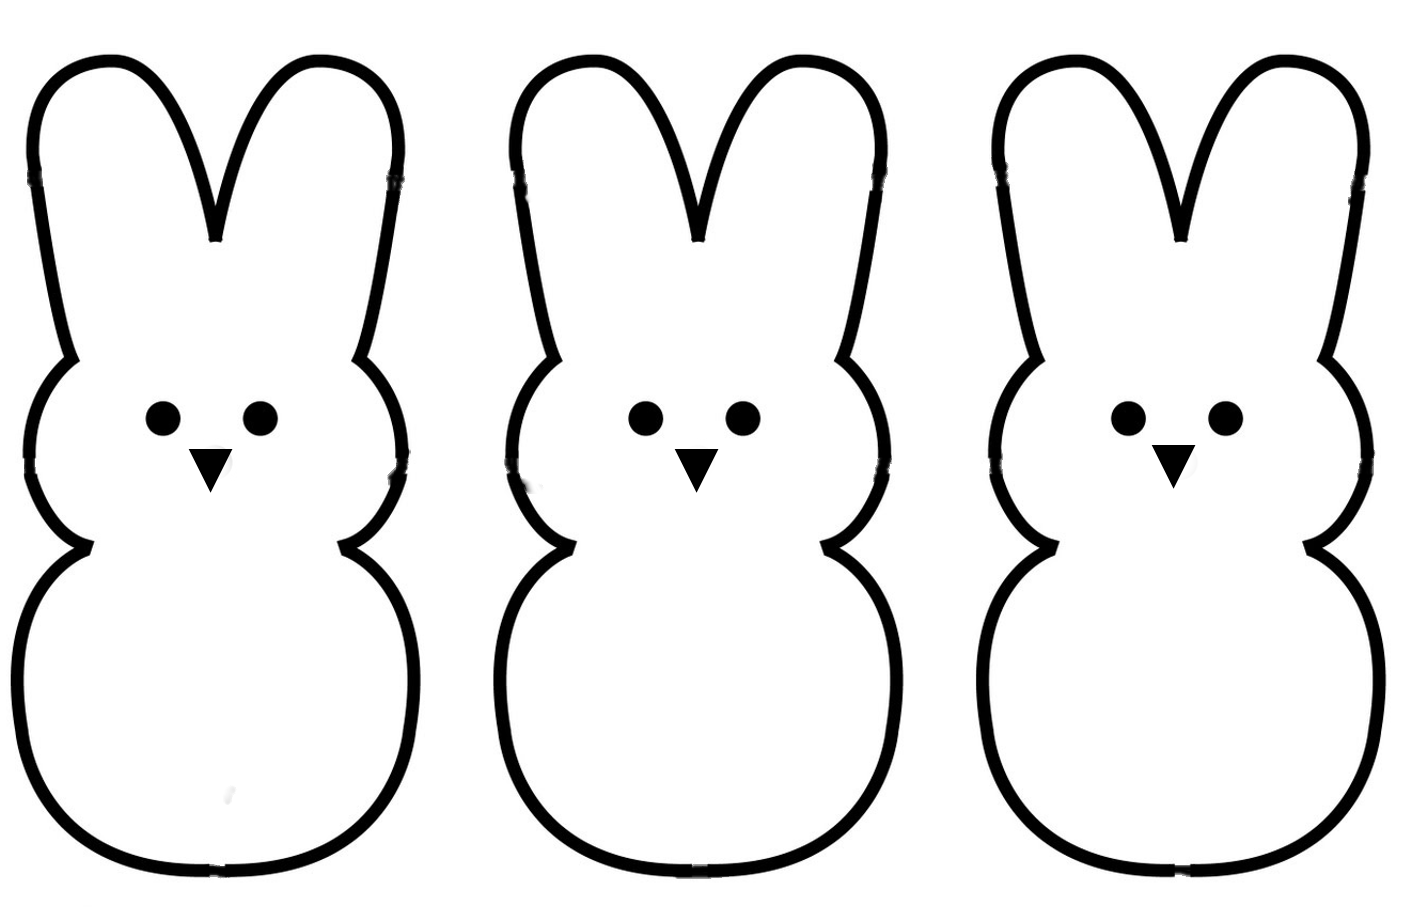 Bunny Outline Clipart